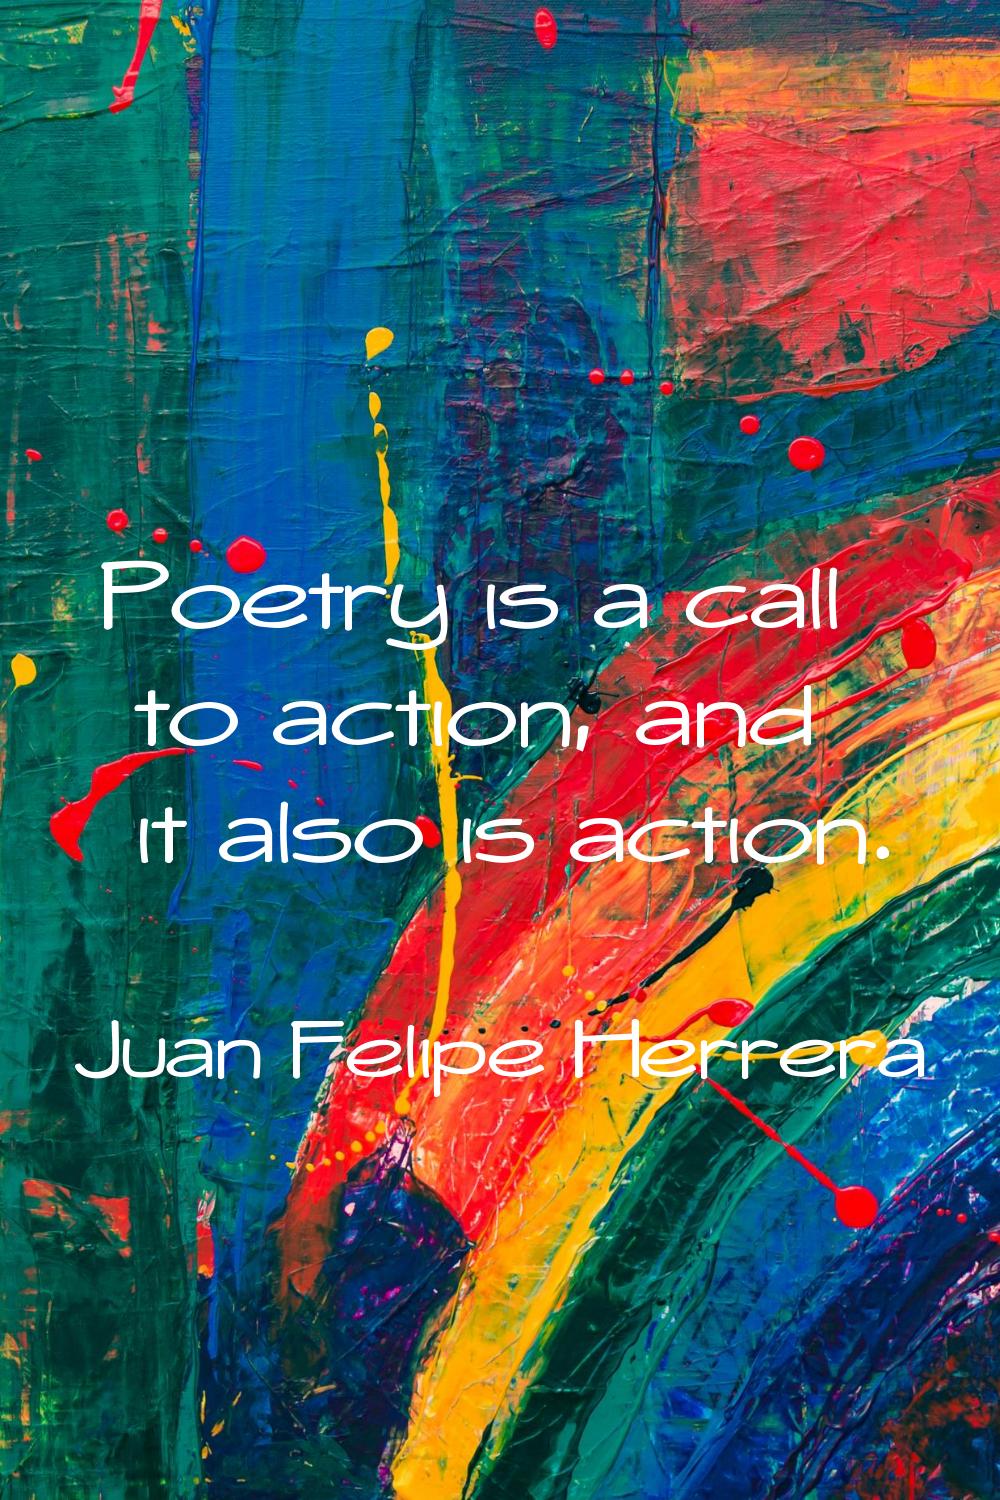 Poetry is a call to action, and it also is action.